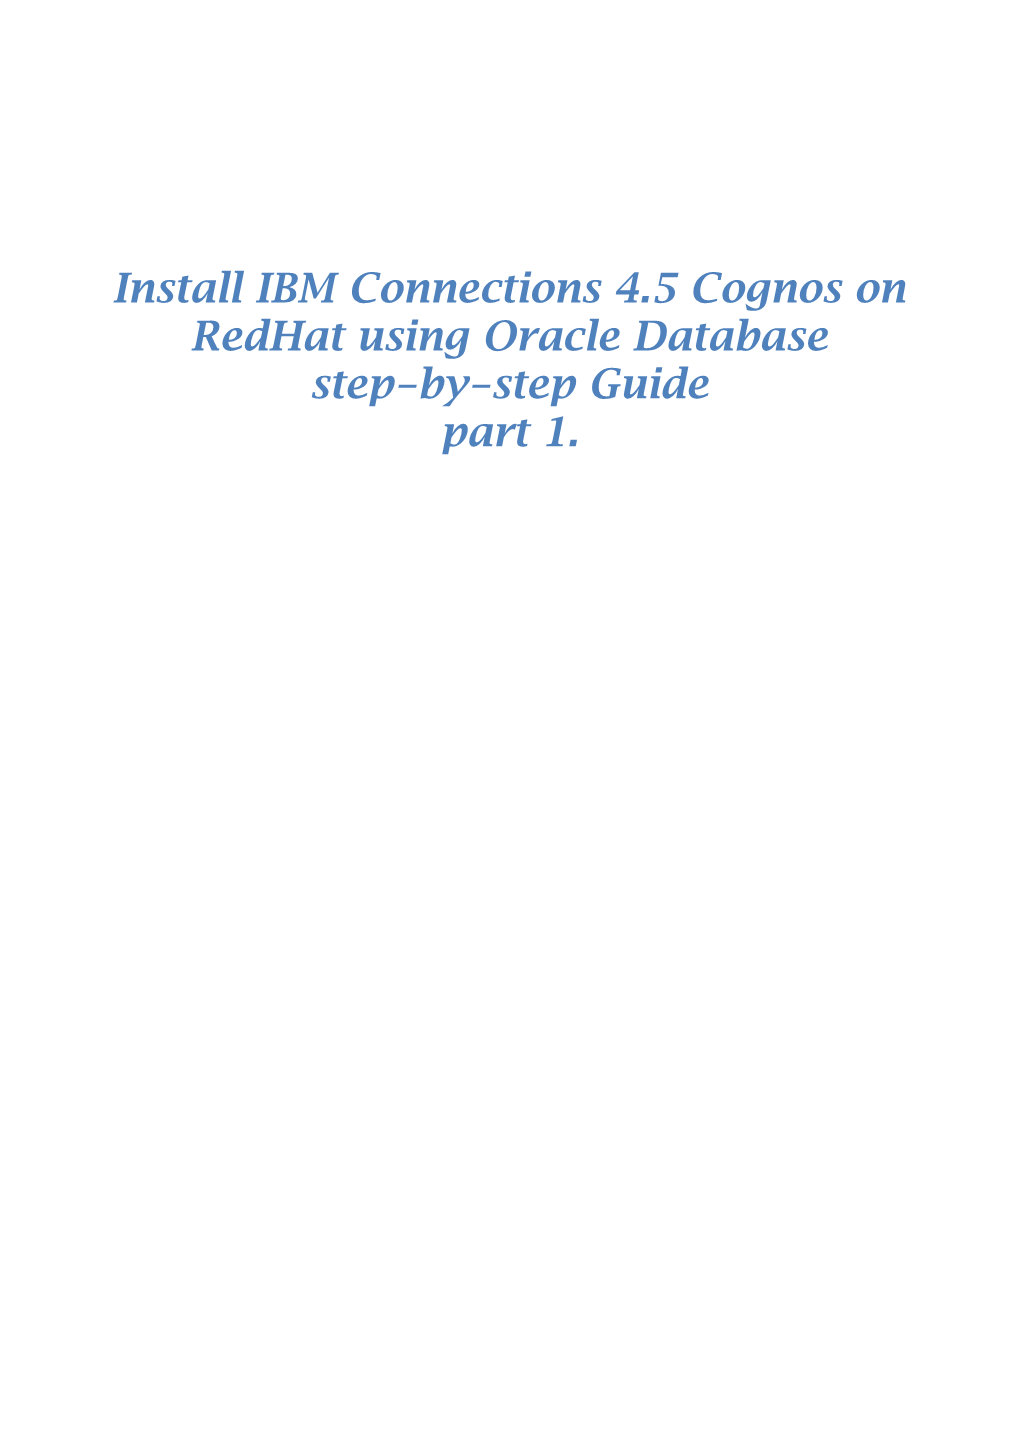 Install IBM Connections 4.5 Cognos on Redhat Using Oracle Database Step-By-Step Guide Part 1